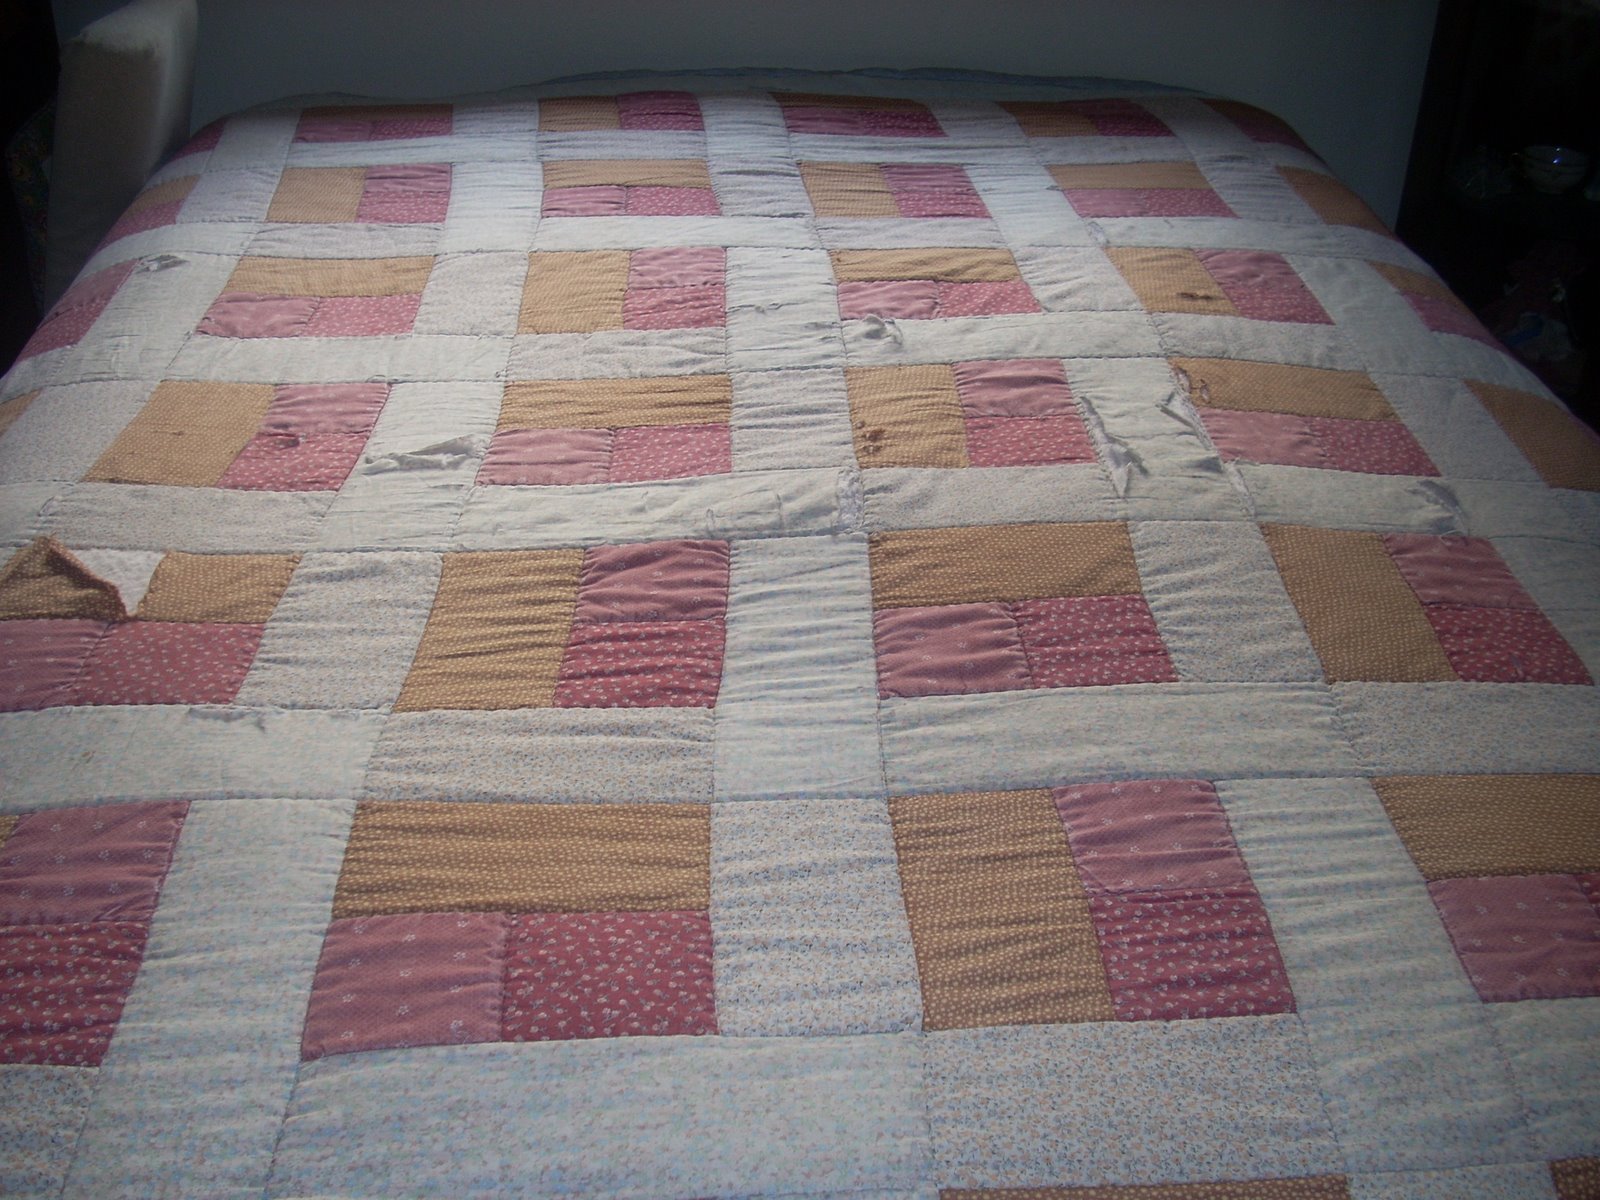 Baby Quilt Patterns - 15 of the Best